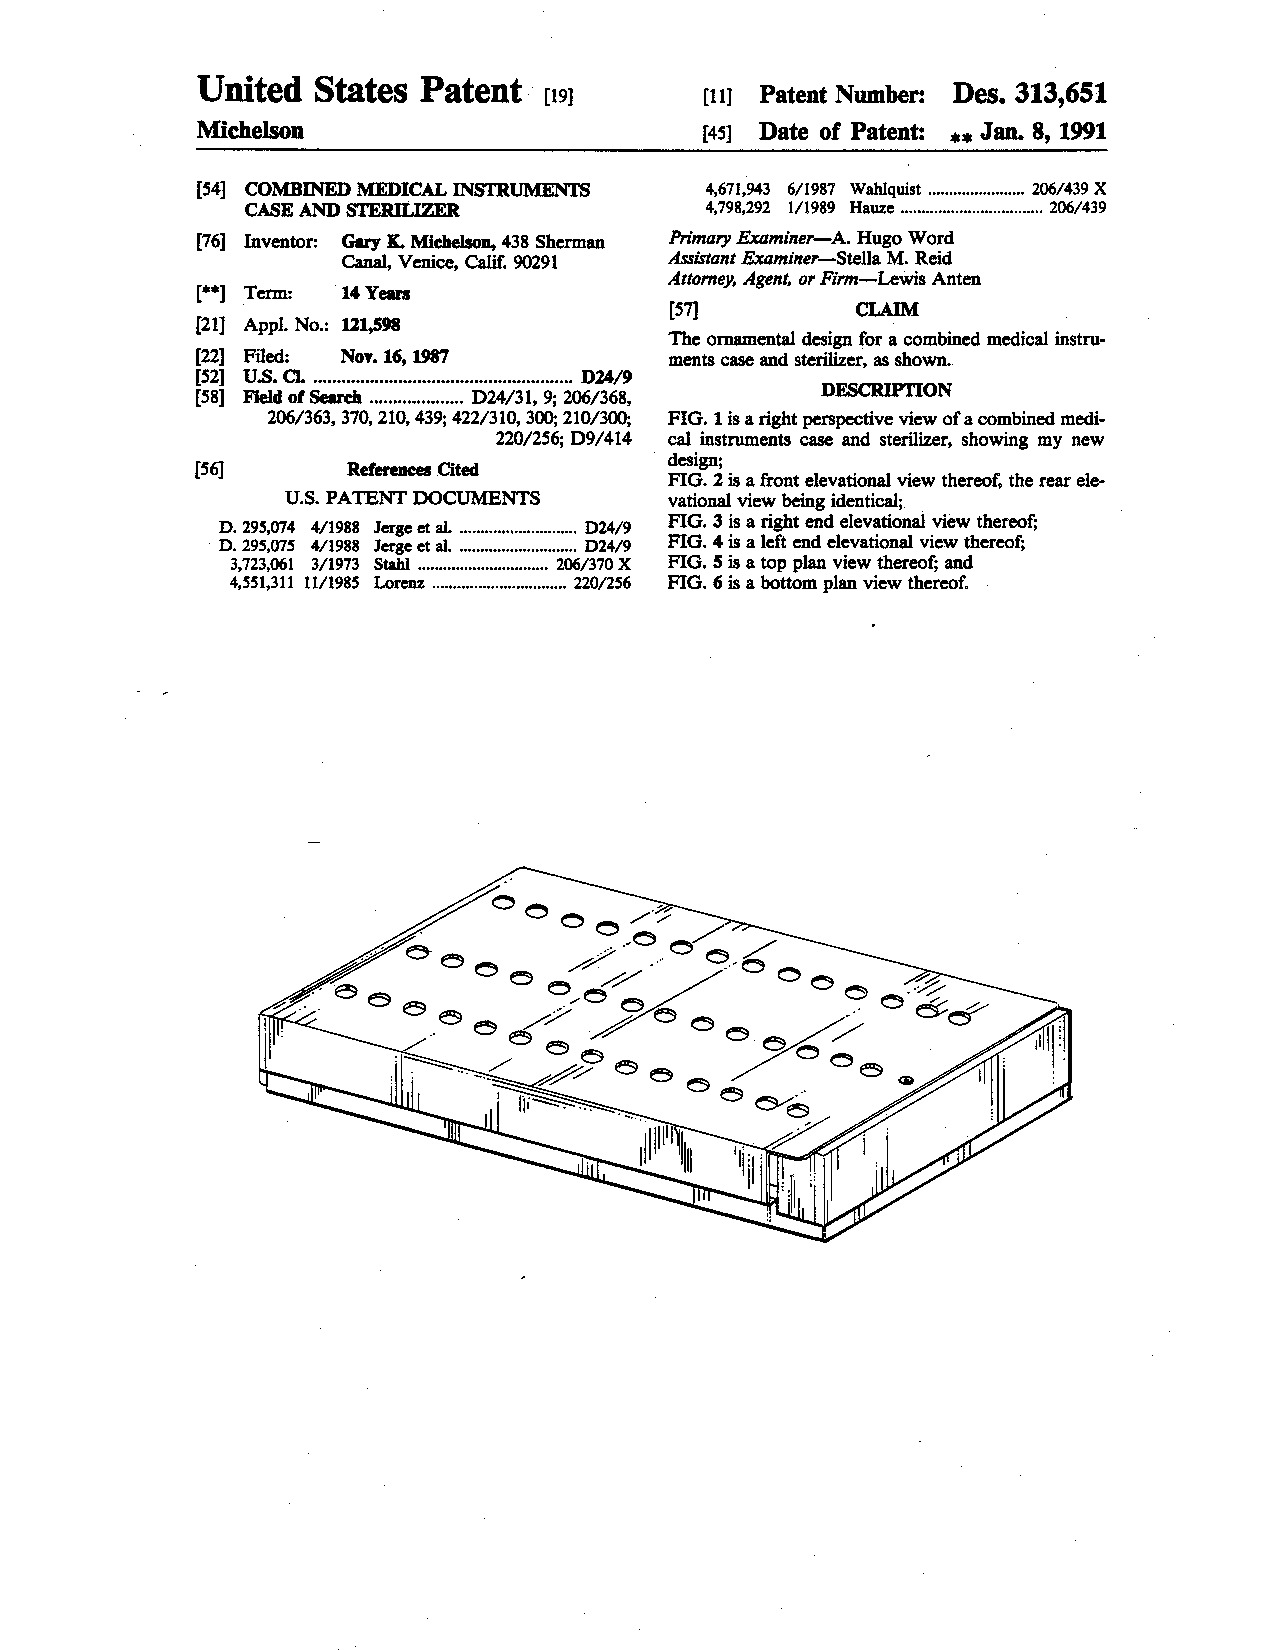 Combined medical instruments case and sterilizer - Patent D313,651